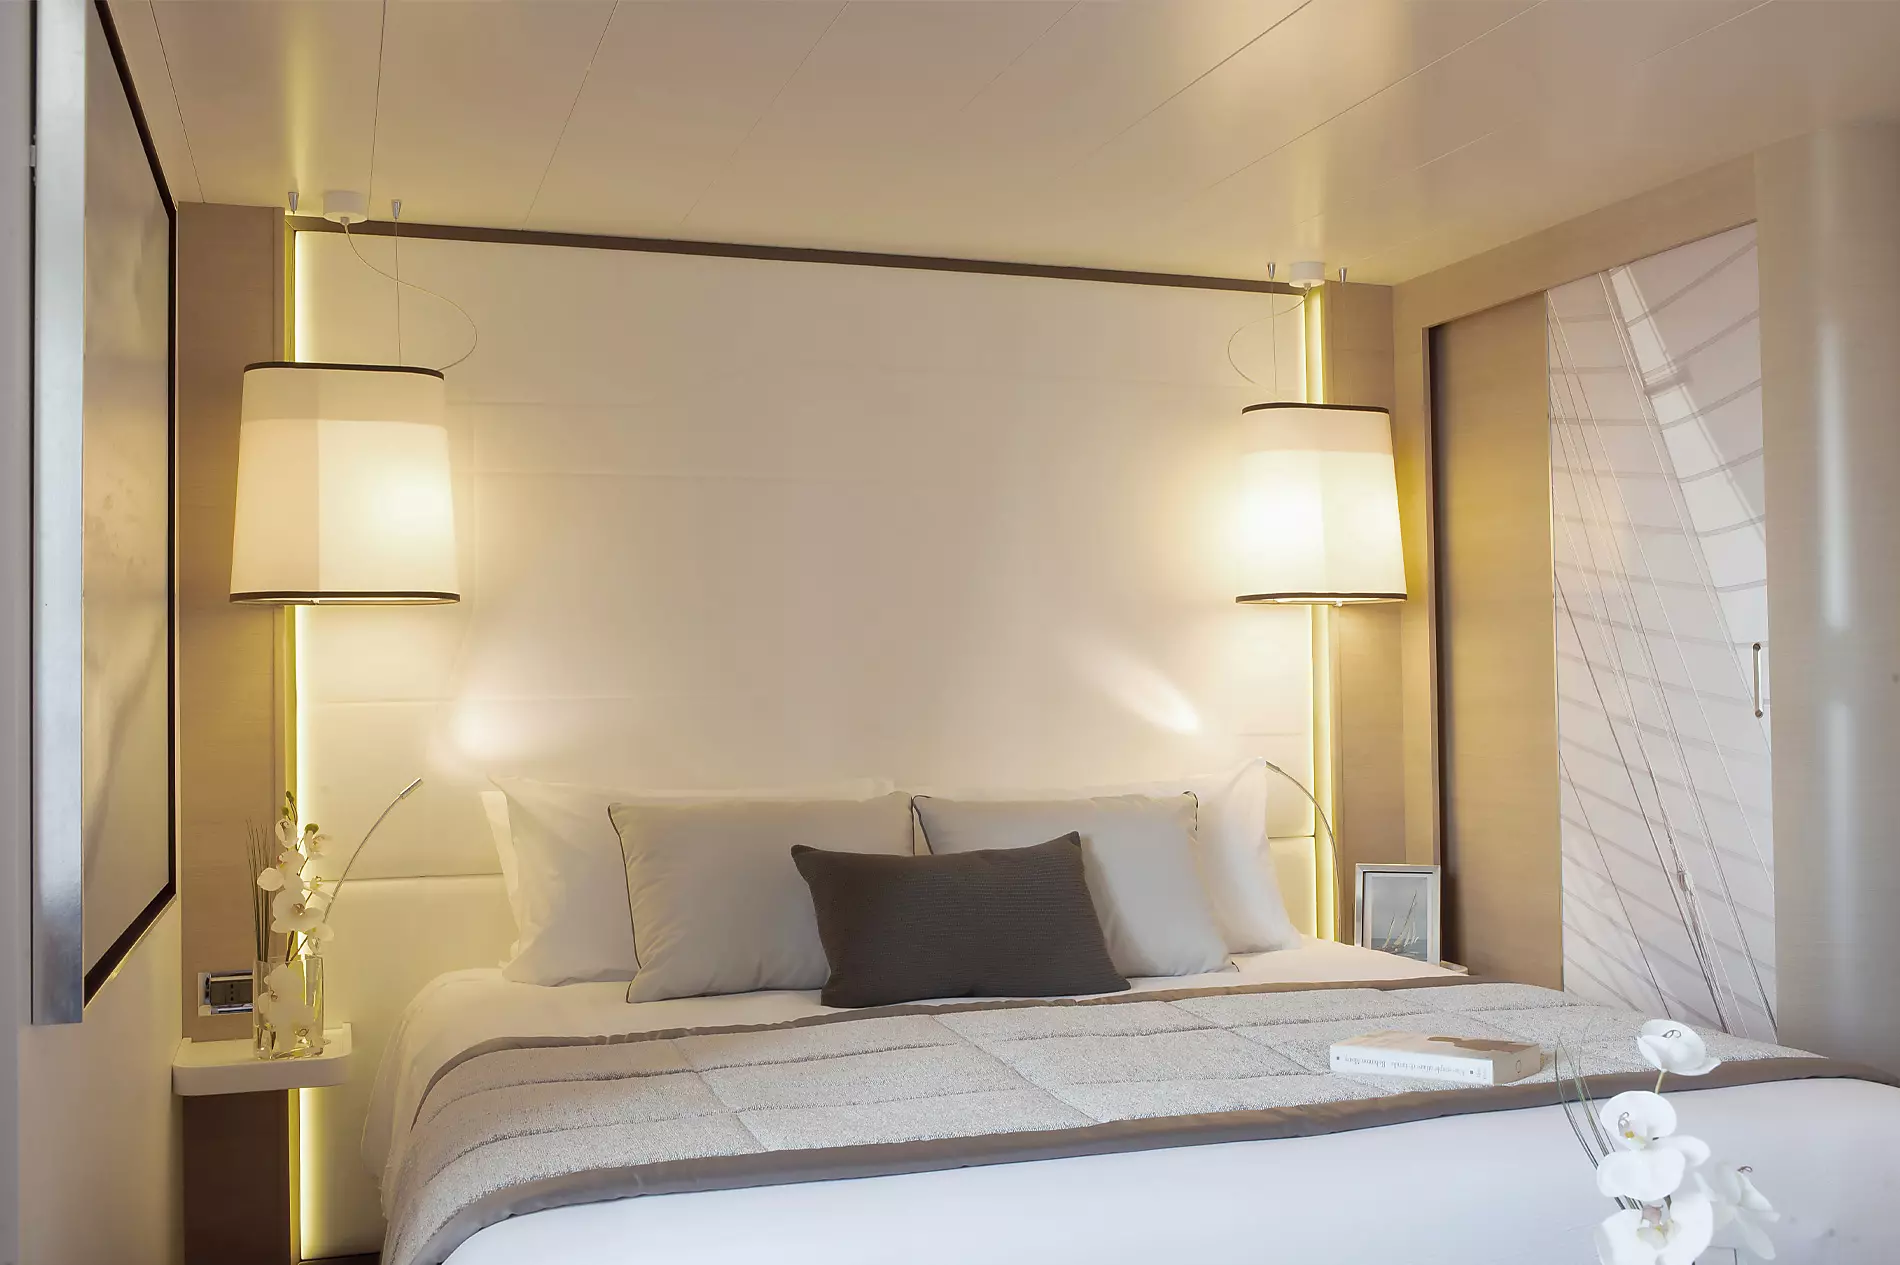 Deluxe Stateroom - Le Soleal - Compahnie du Ponant